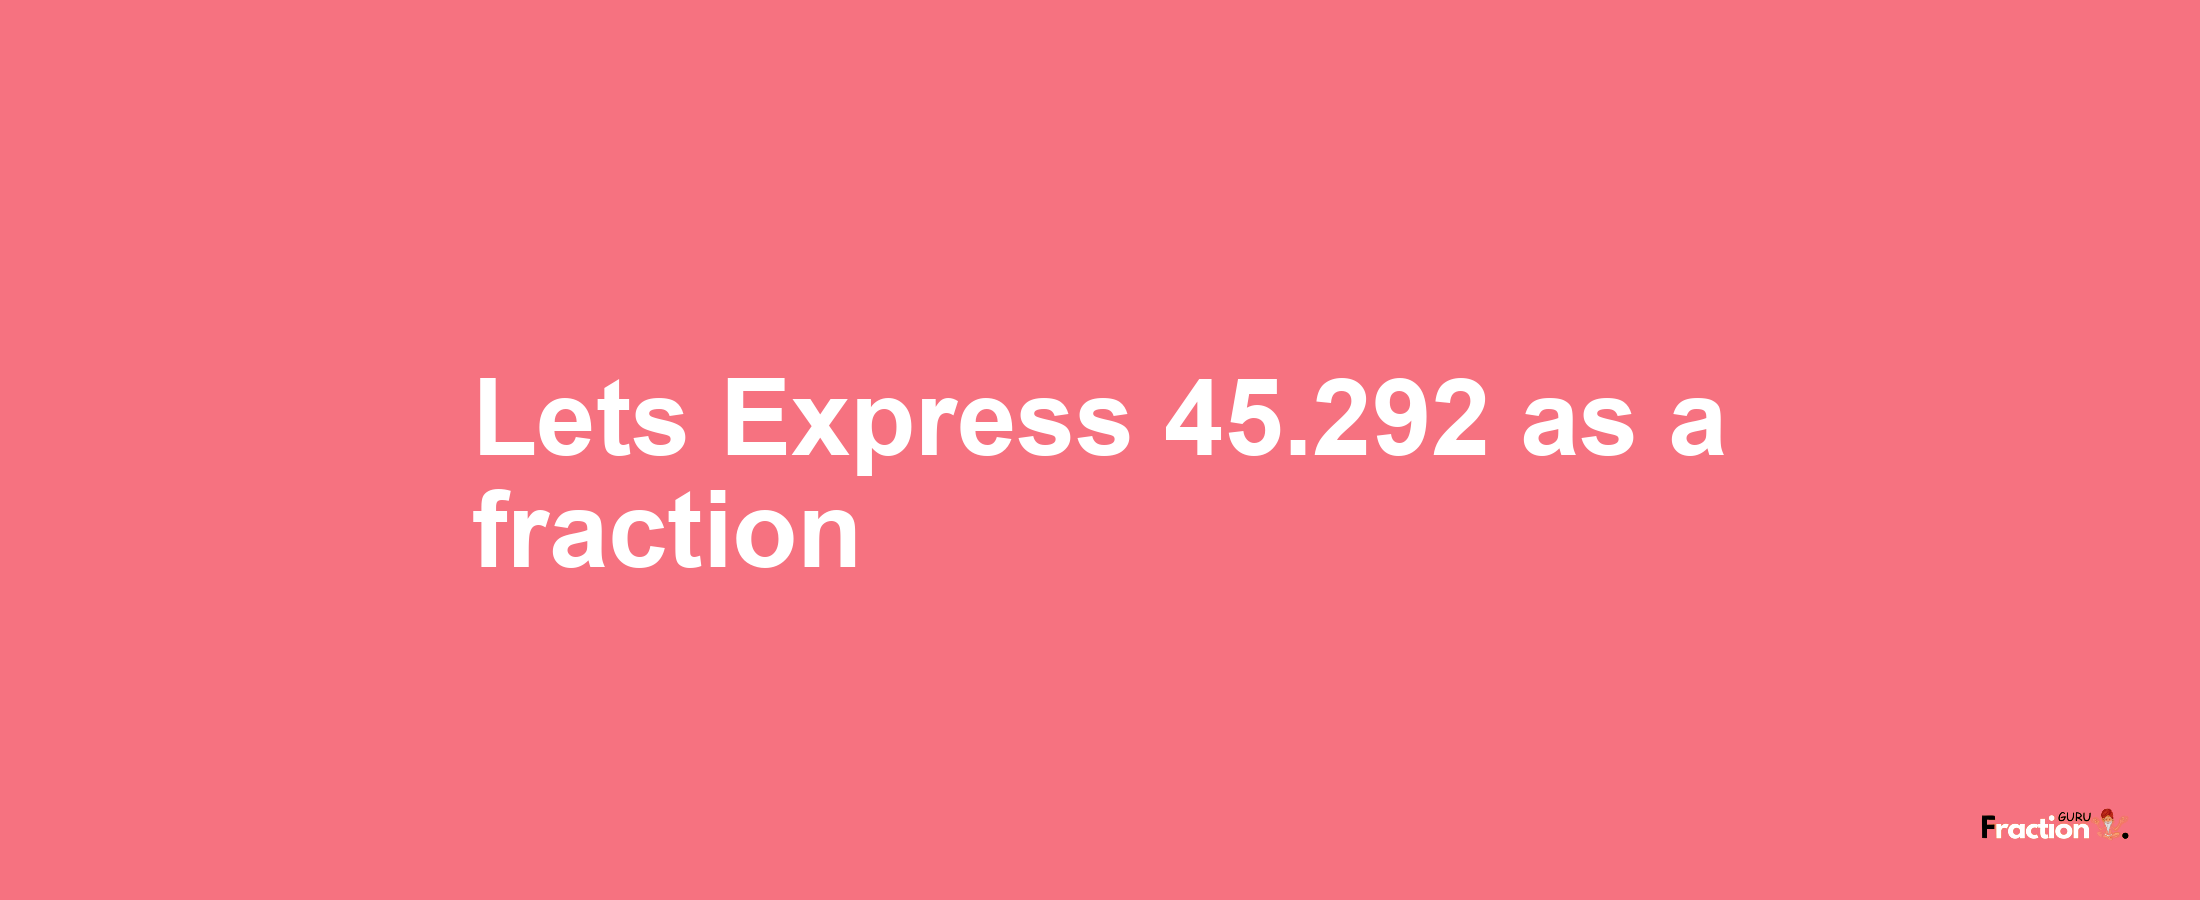 Lets Express 45.292 as afraction